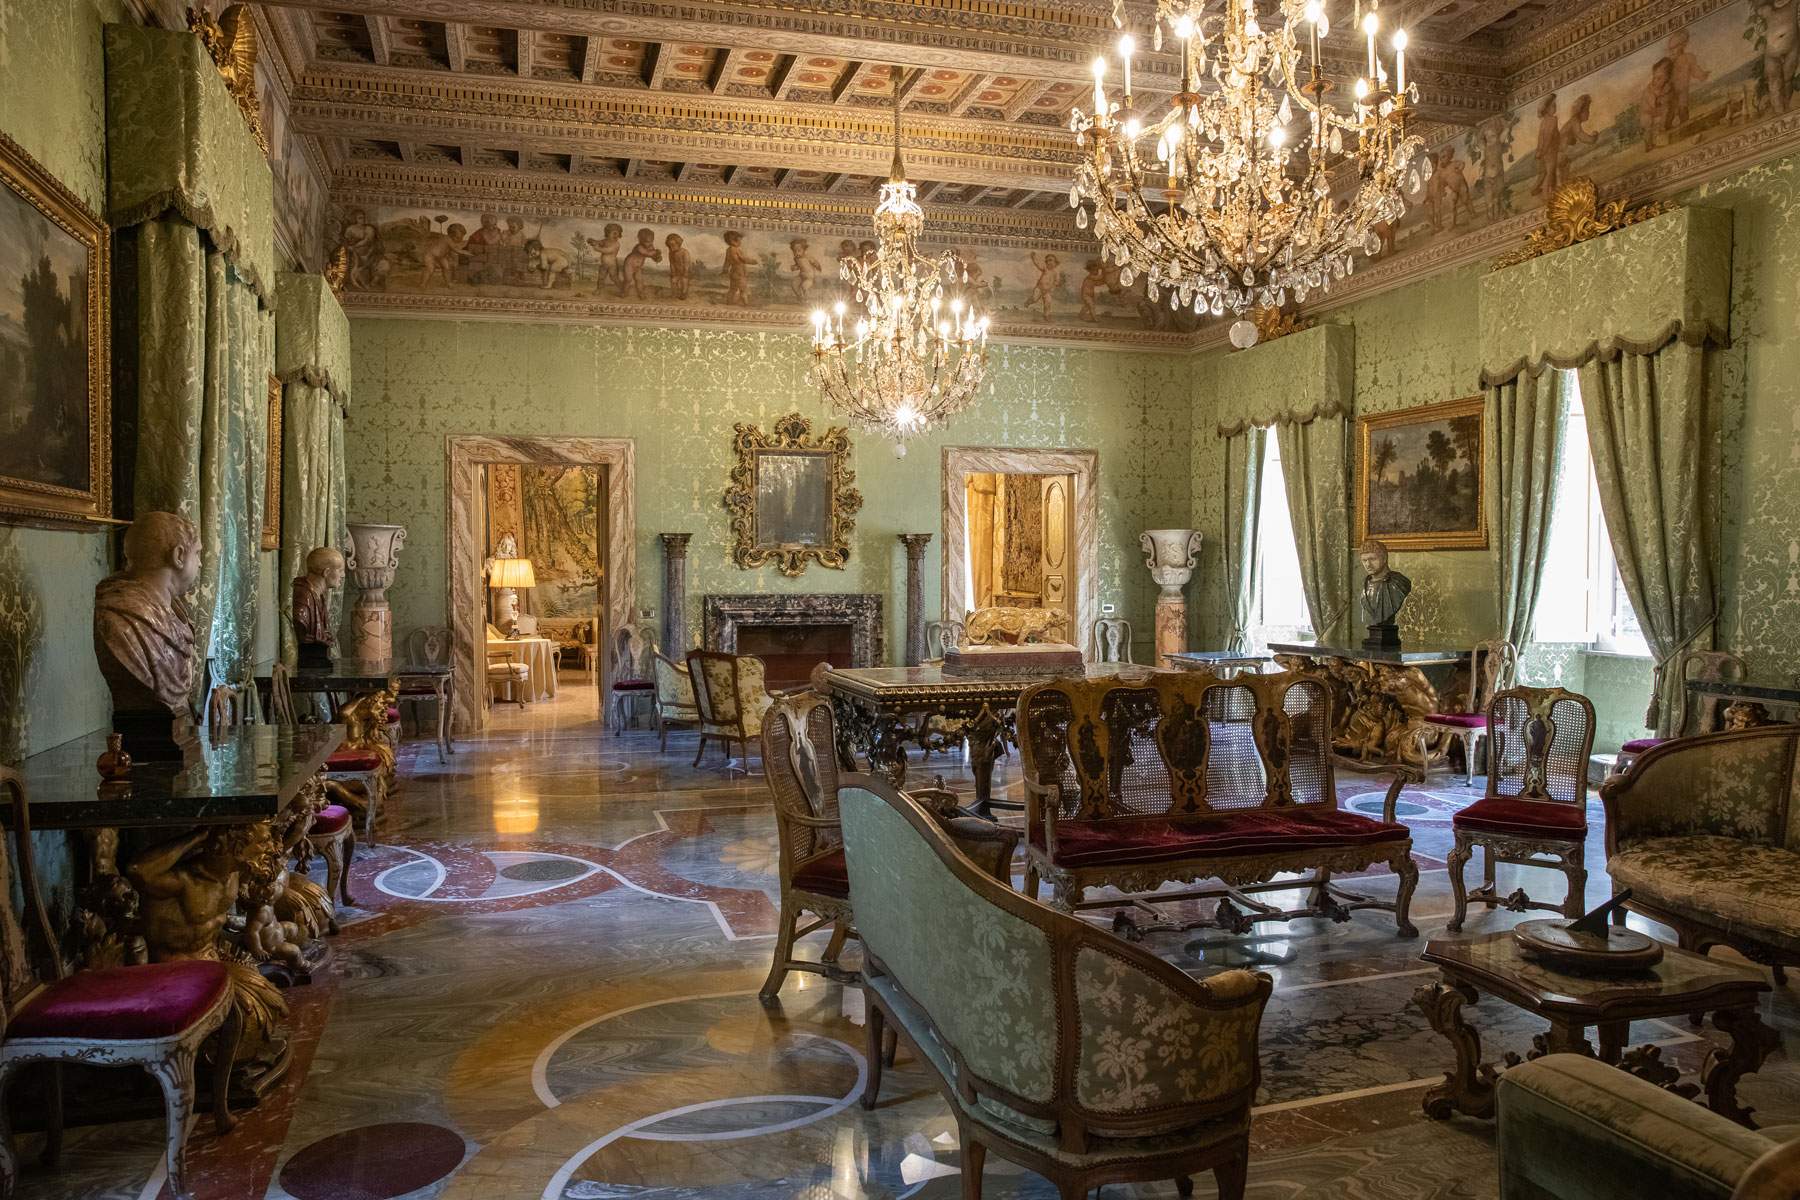 Rome, finishes restoration of Casa Litta at Palazzo Orsini. Opening to the public is being studied